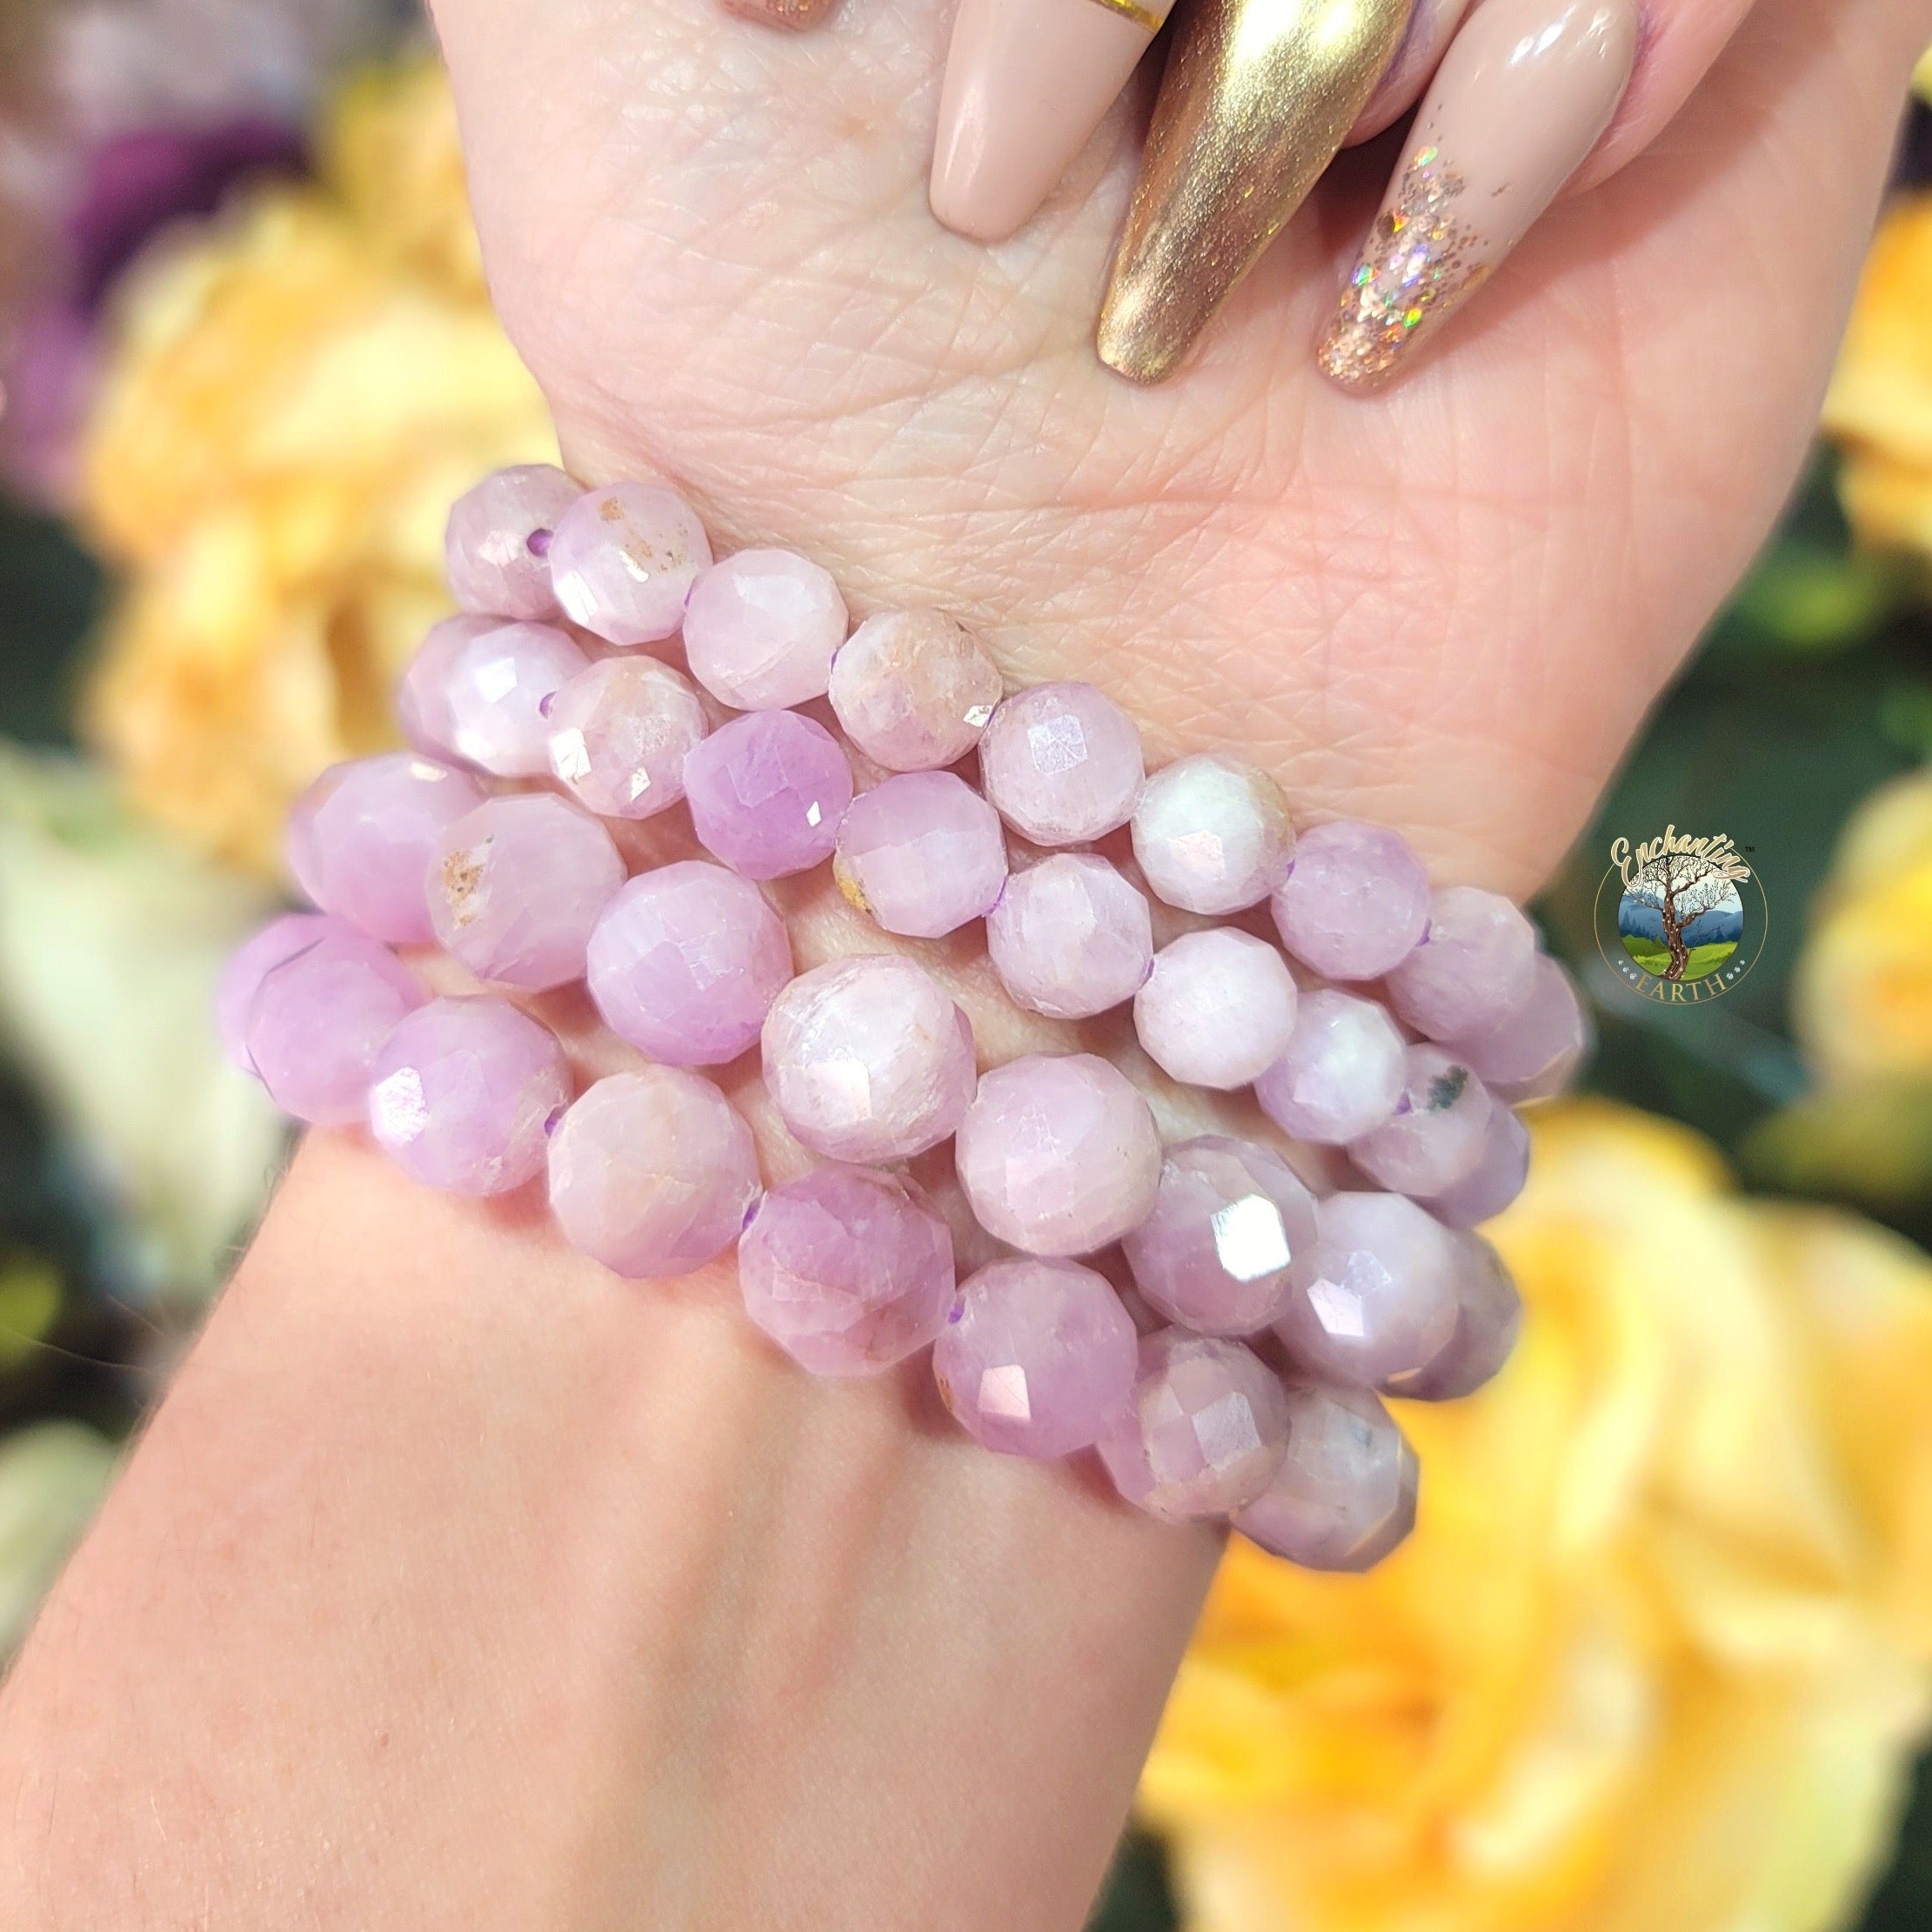 Kunzite Faceted Bracelet for Emotional, Family Healing and Opening Your Heart to Love